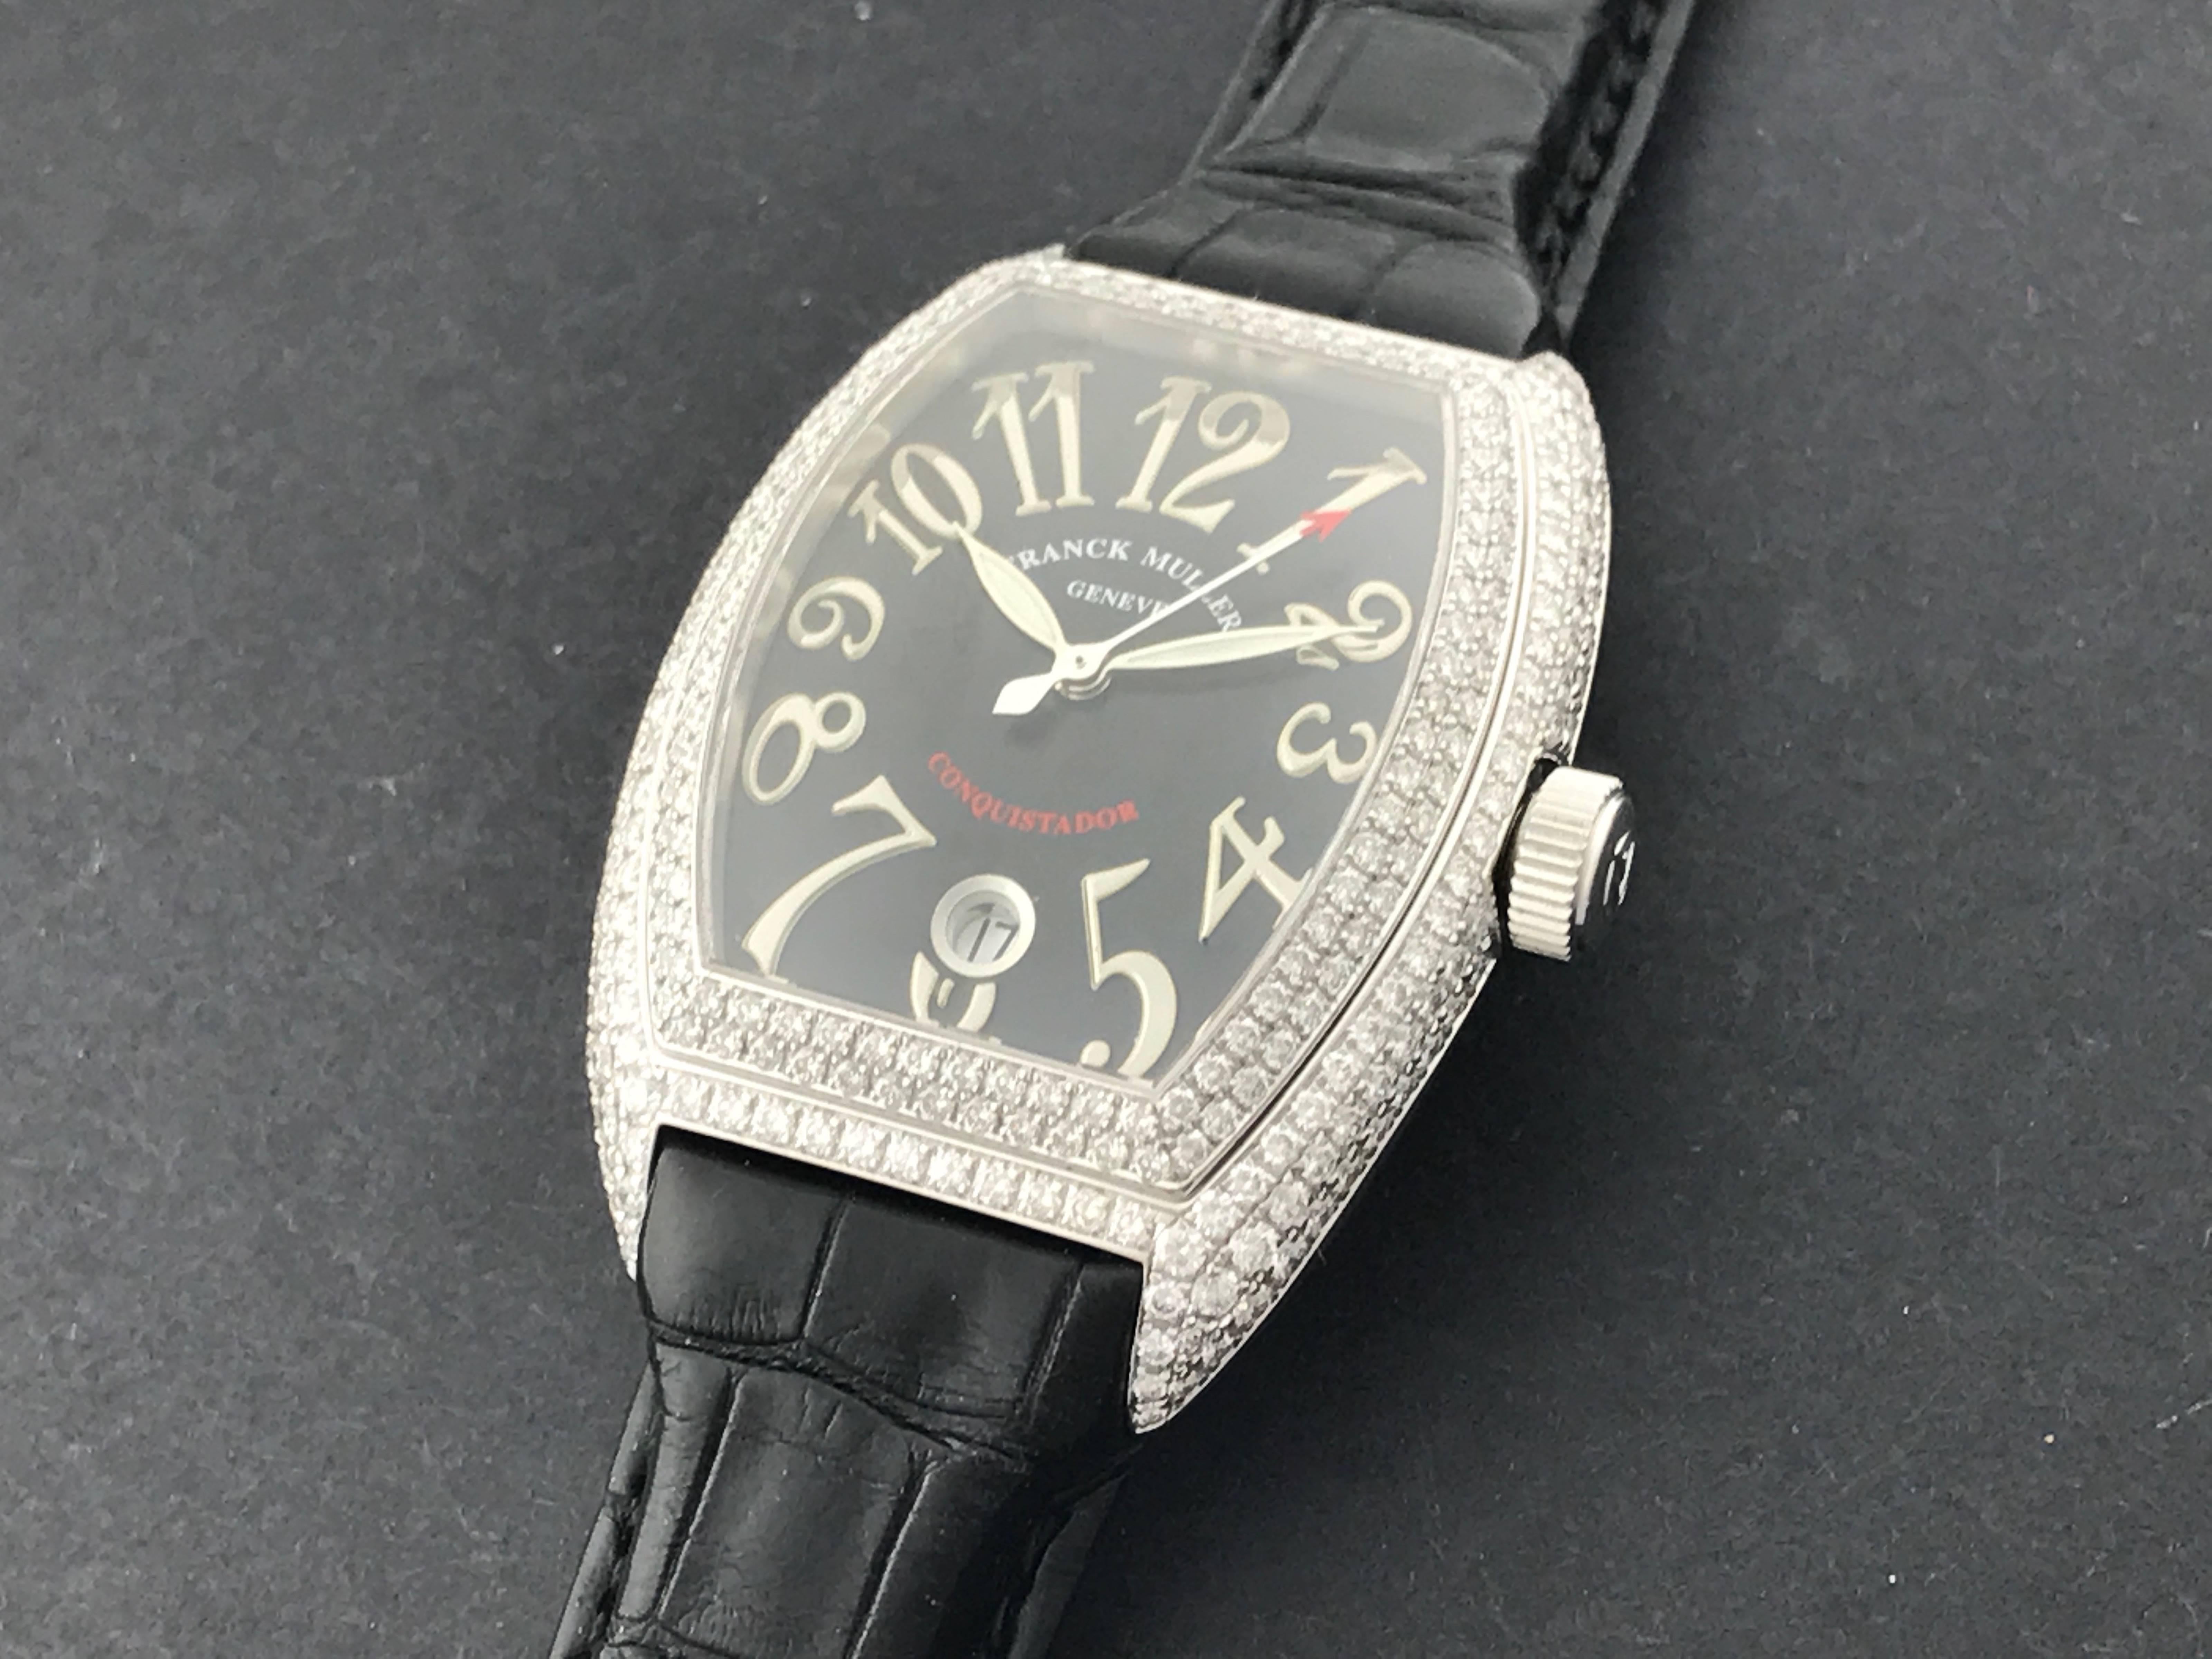 Stunning Franck Muller Conquistador Men's certified pre-owned automatic wrist watch, Model 8002 SC D. Features a black guilloche dial with arabic numerals, 18K White Gold rectangular tonneau style Full Pave Franck Muller Diamond case and black